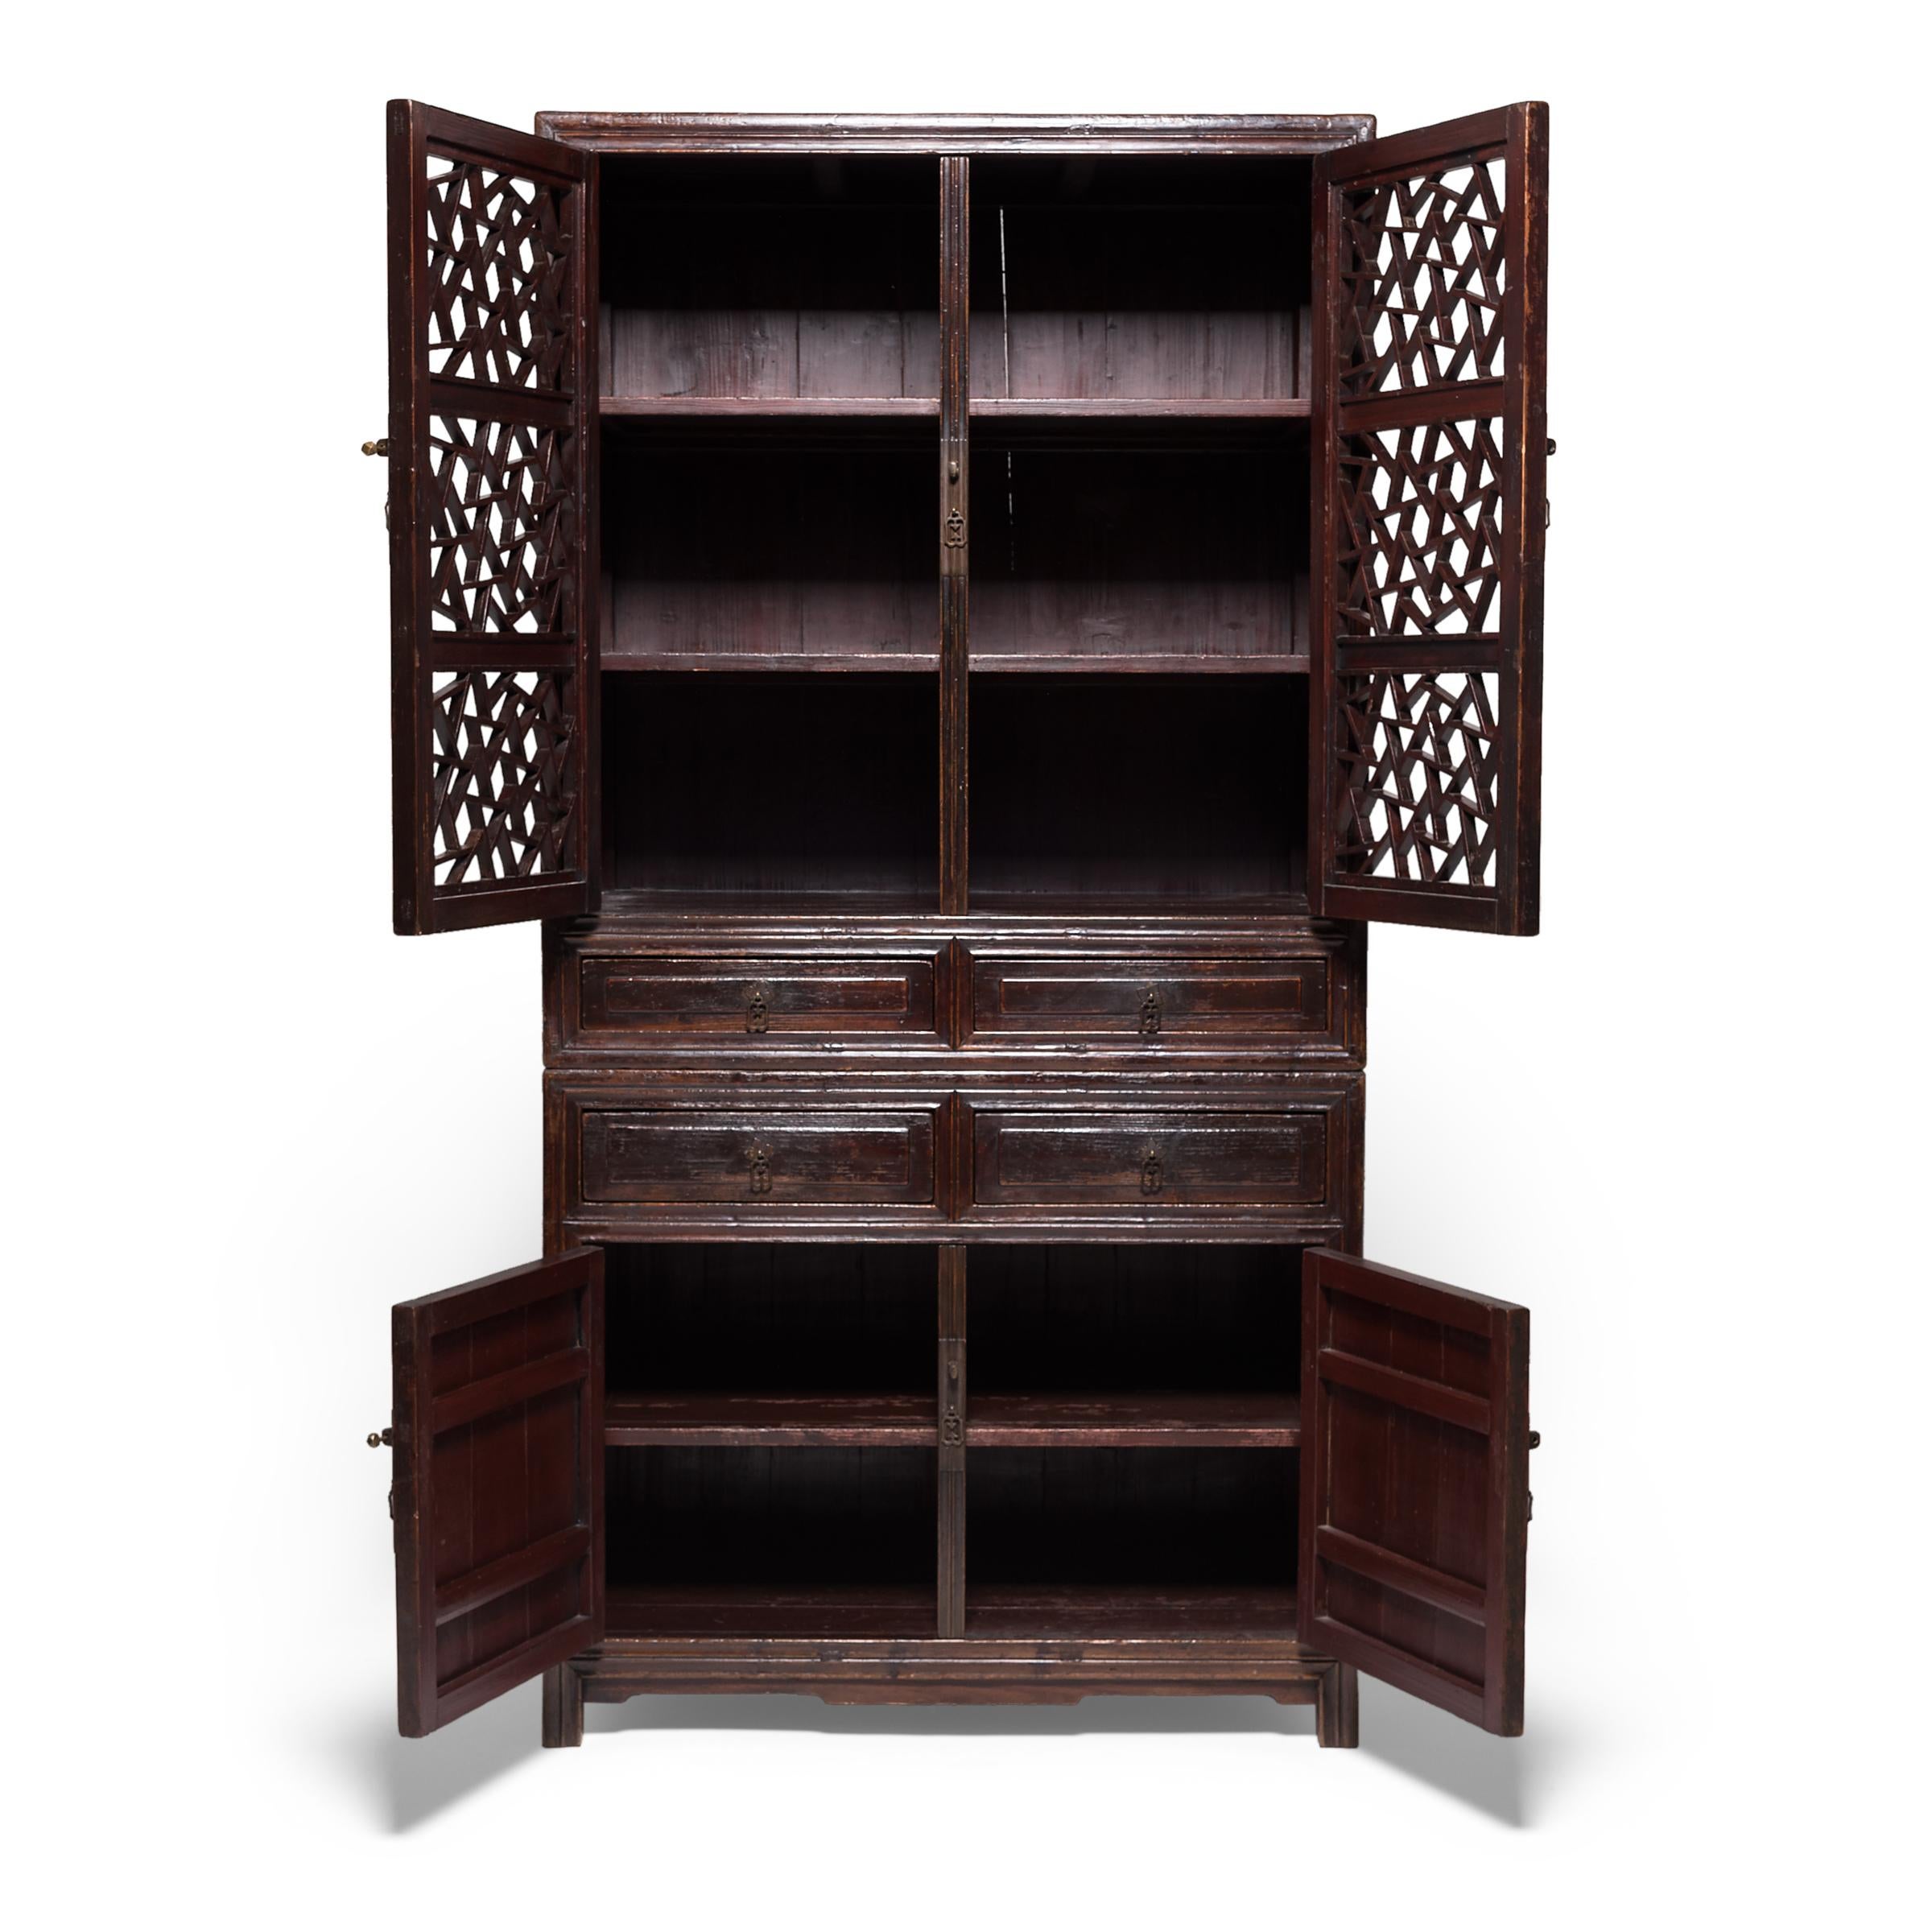 This elegant 19th century tall cabinet was crafted by an artisan in Suzhou, China's 